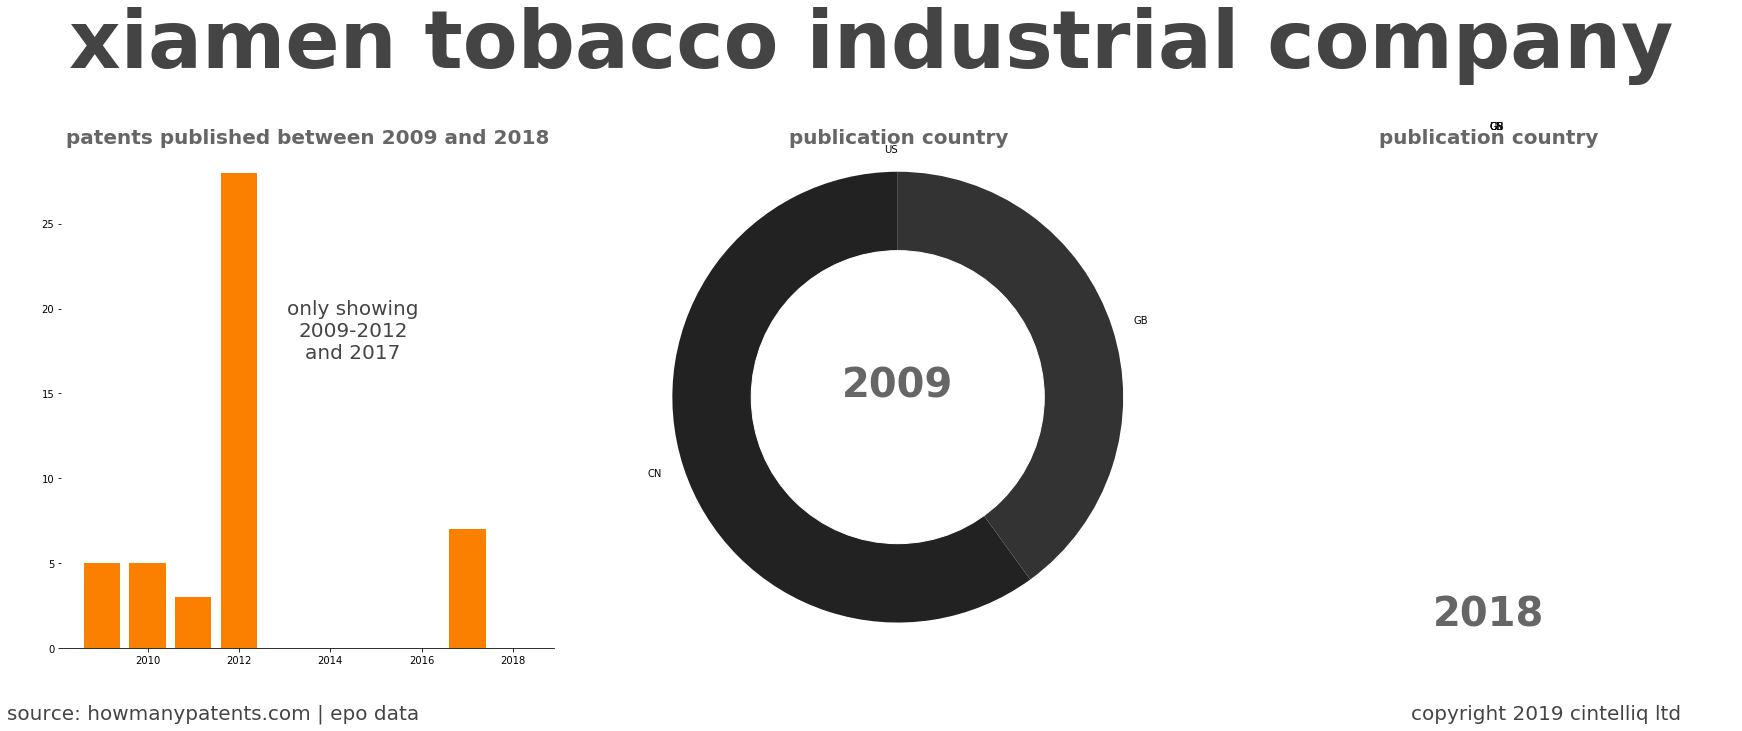 summary of patents for Xiamen Tobacco Industrial Company